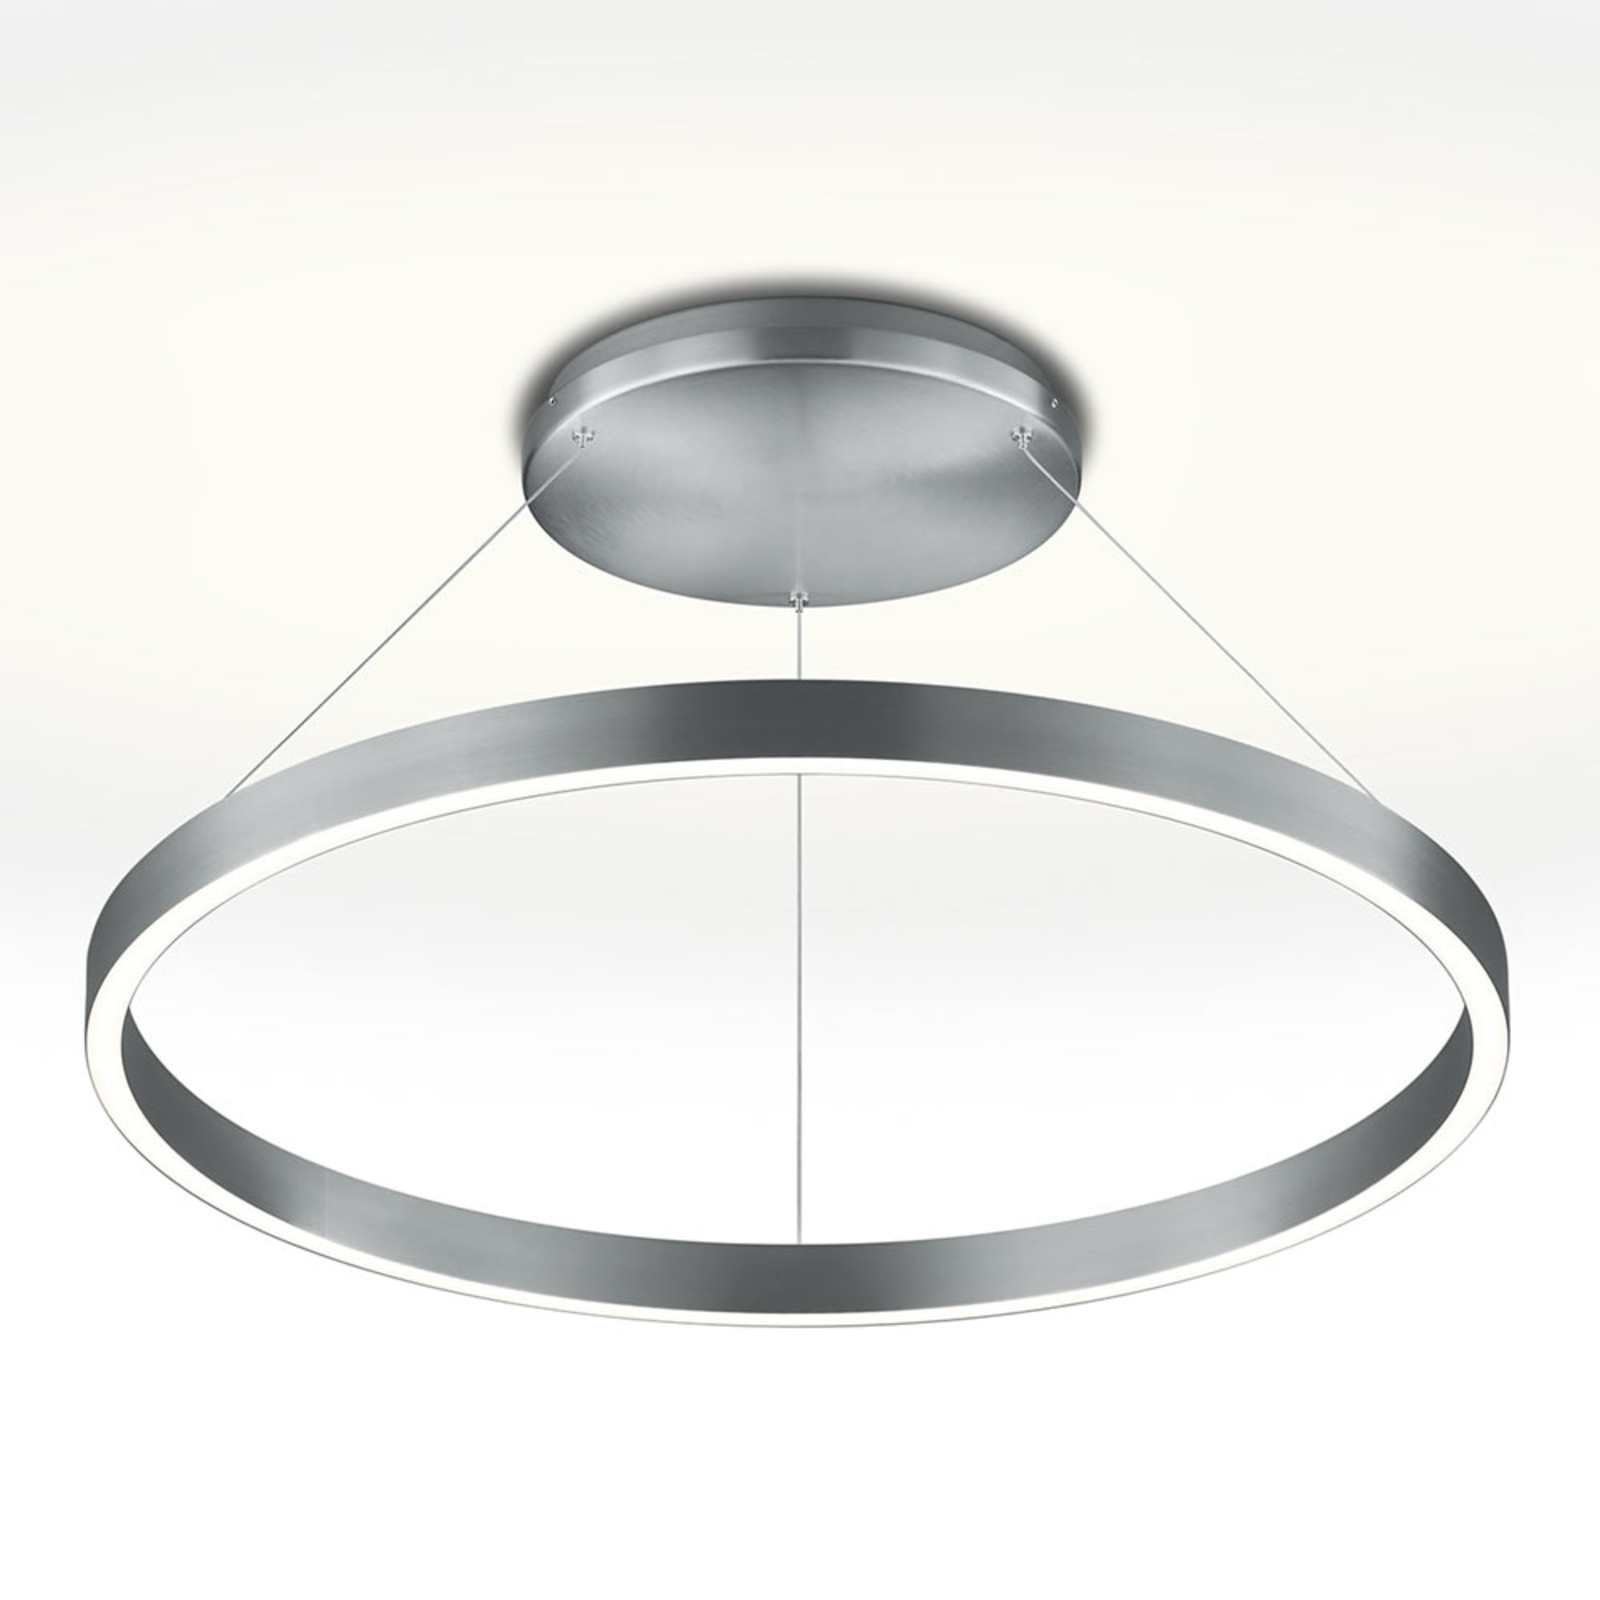 Ring-shaped LED ceiling light Circle - dimmable | Lights.co.uk